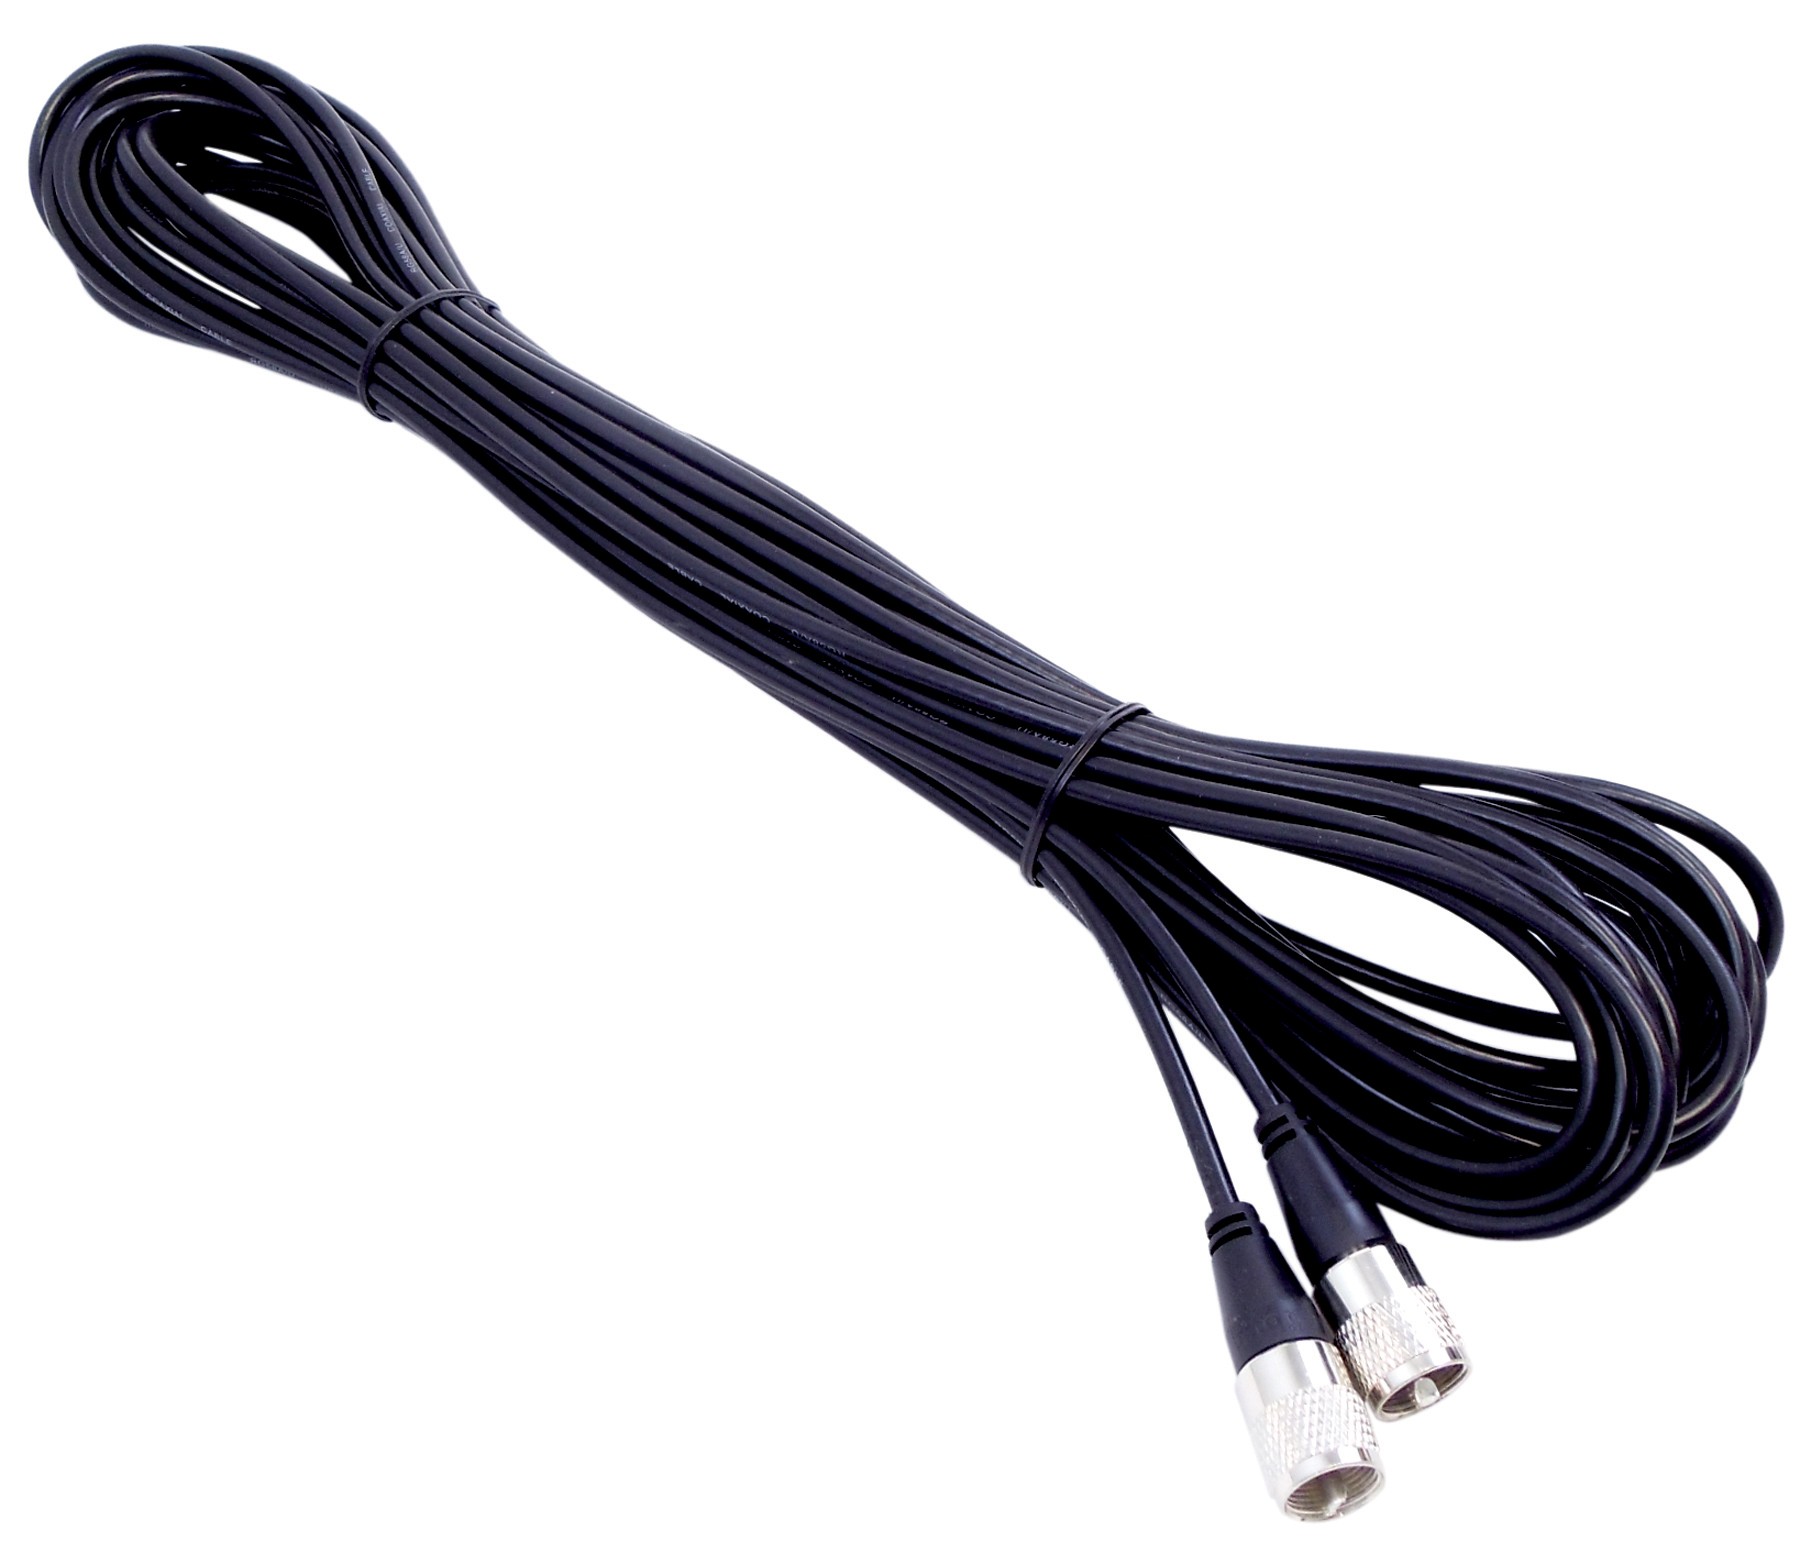 Kalibur 50 Foot Black Rg58A/U Coax Cable Assembly With Molded Pl259 Connectors On Each End